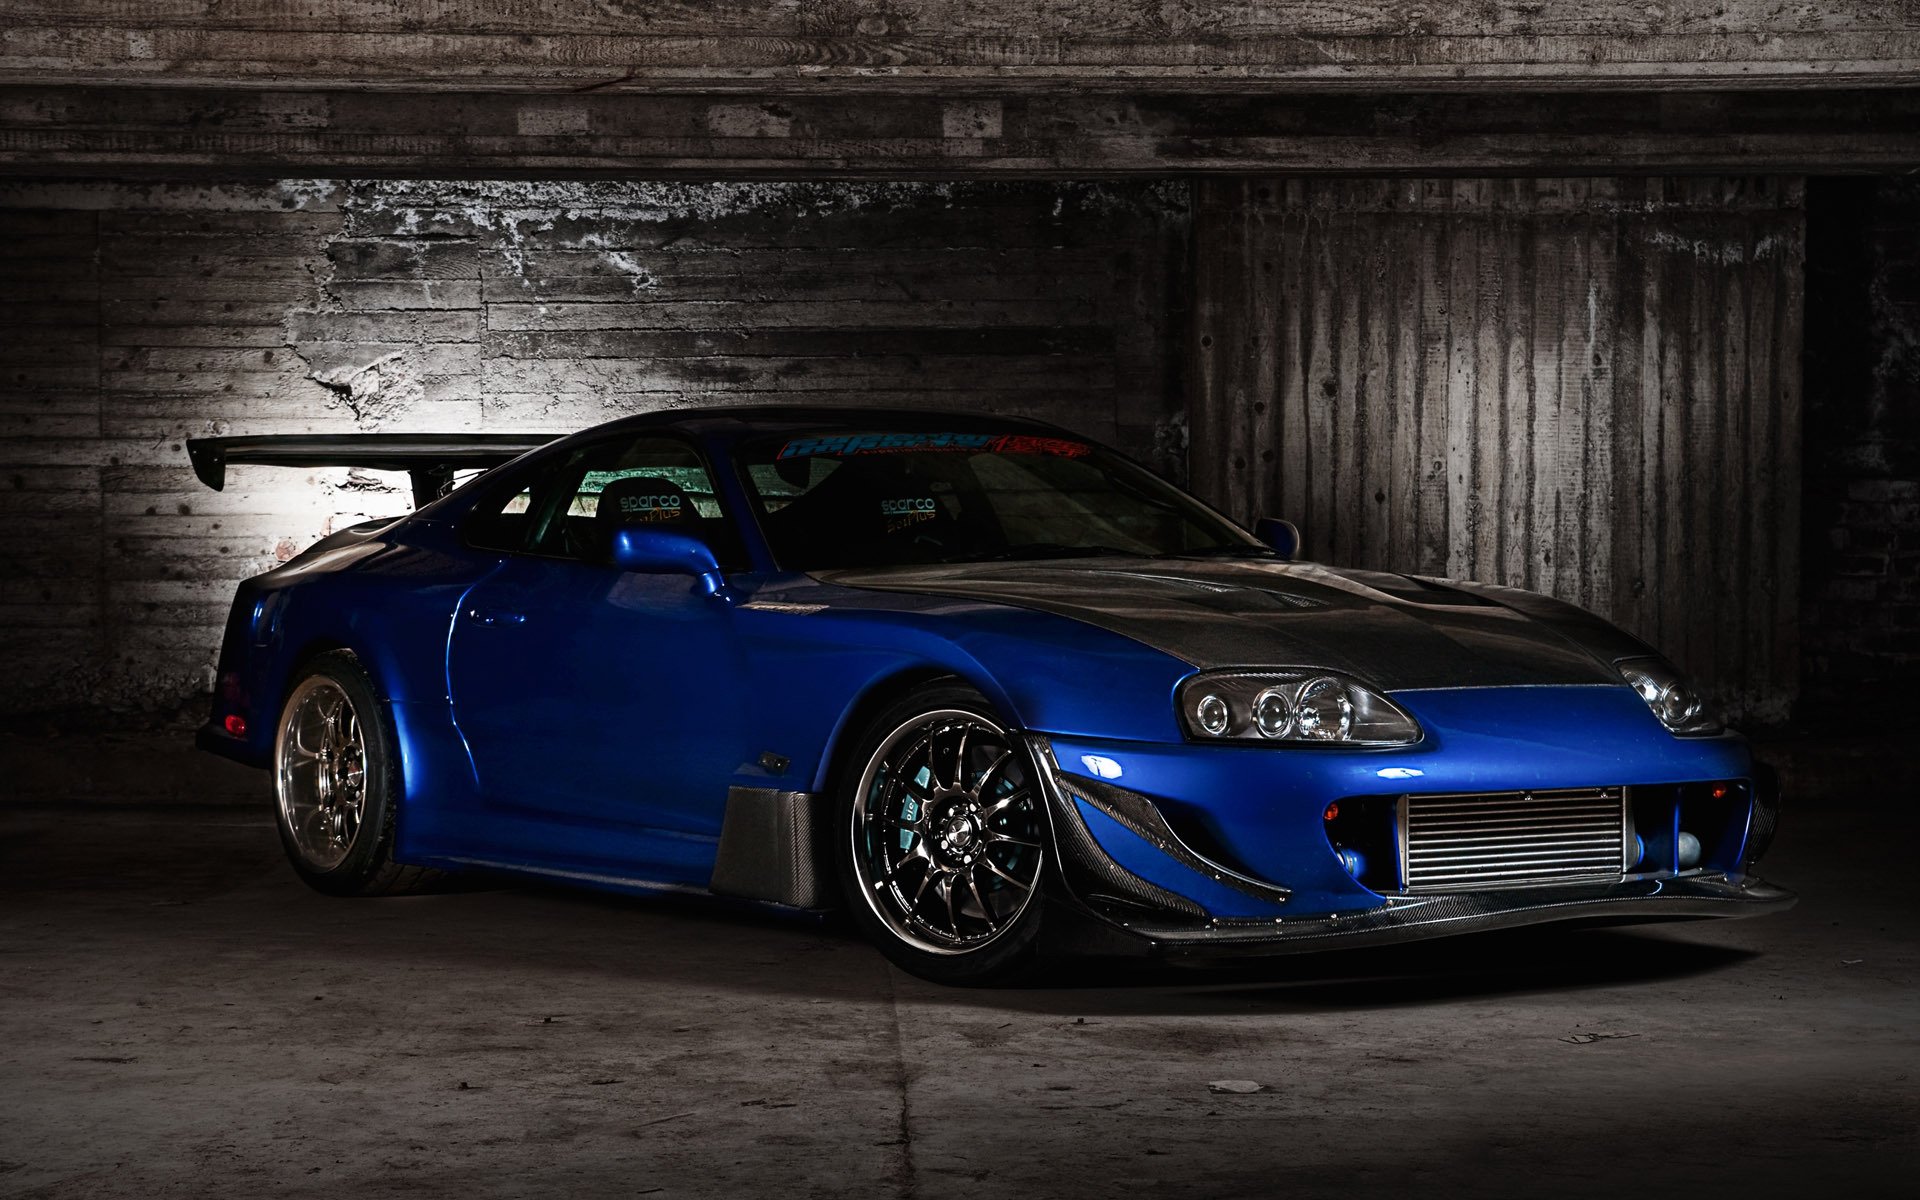 toyota, Supra, Tuning, Cars, Coupe, Japan, Turbo Wallpapers HD / Desktop and Mobile